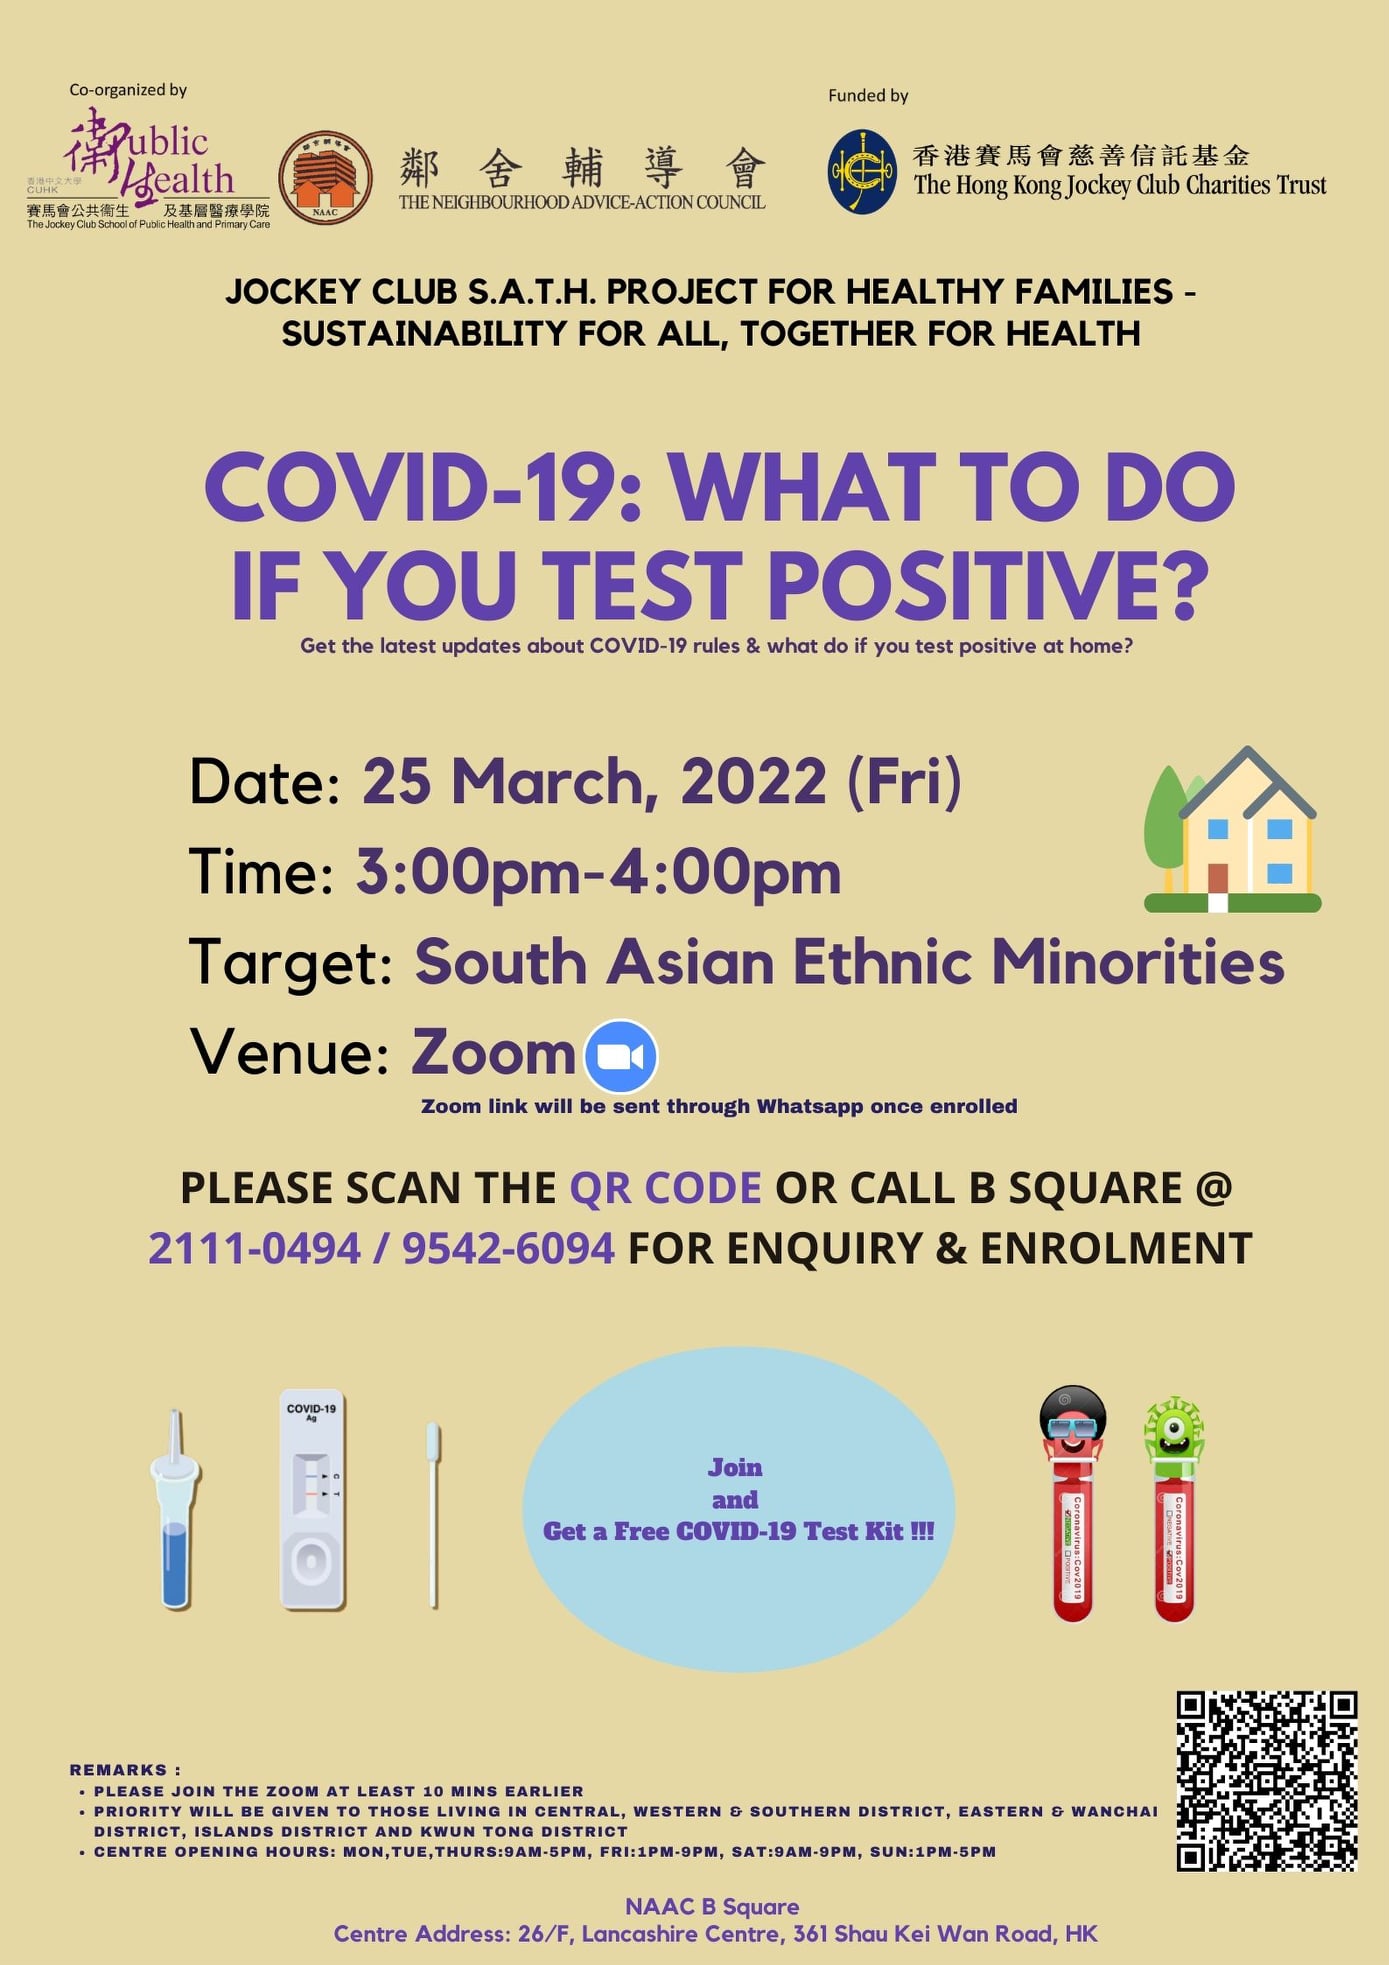 Wondering what to do if you test positive? Register at 2111 0494 for more information!!